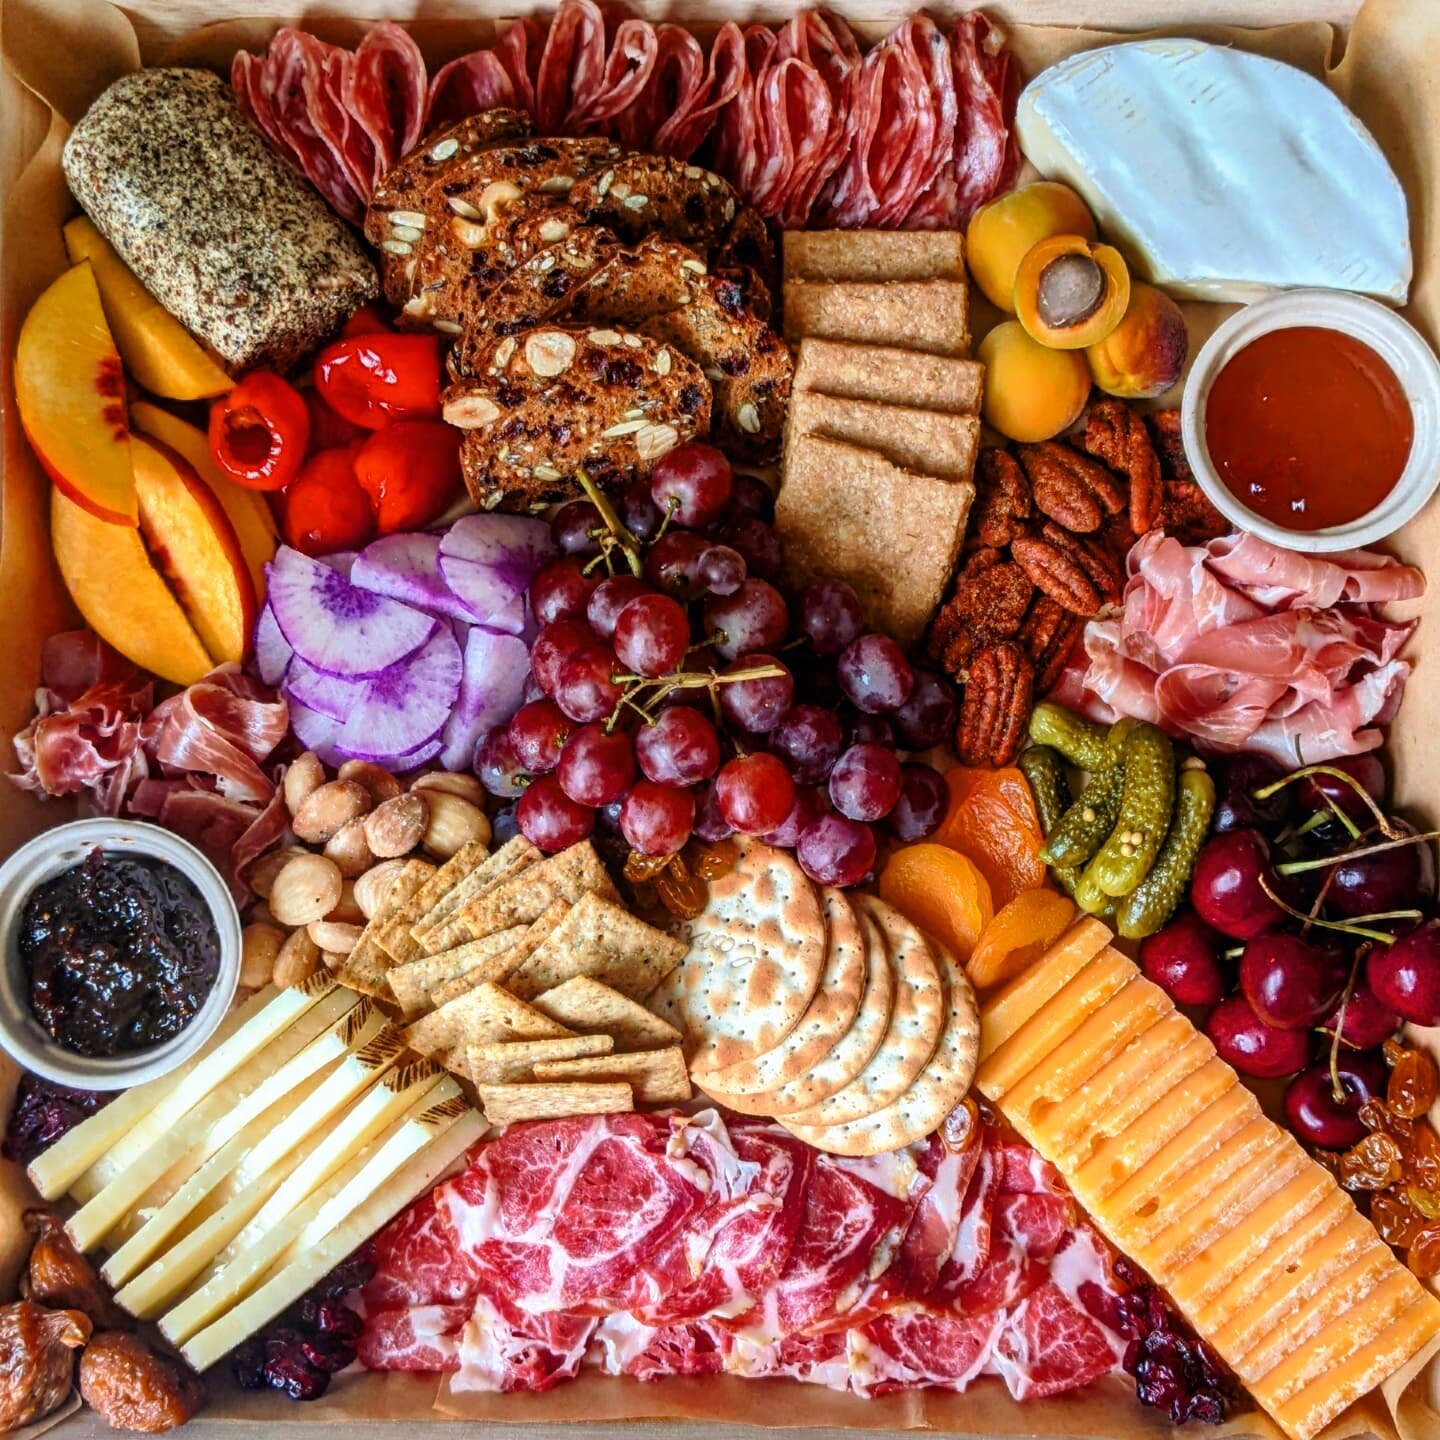 weekend plans: 🧀 + 🏖️ + 🧀 repeat

#ajoyinthekitchen #cheese #charcuterie #cheeseboard #charcuterieboard #taunton #tauntonma #catering #madetoorder #picnic #cookout #party #linkinbio